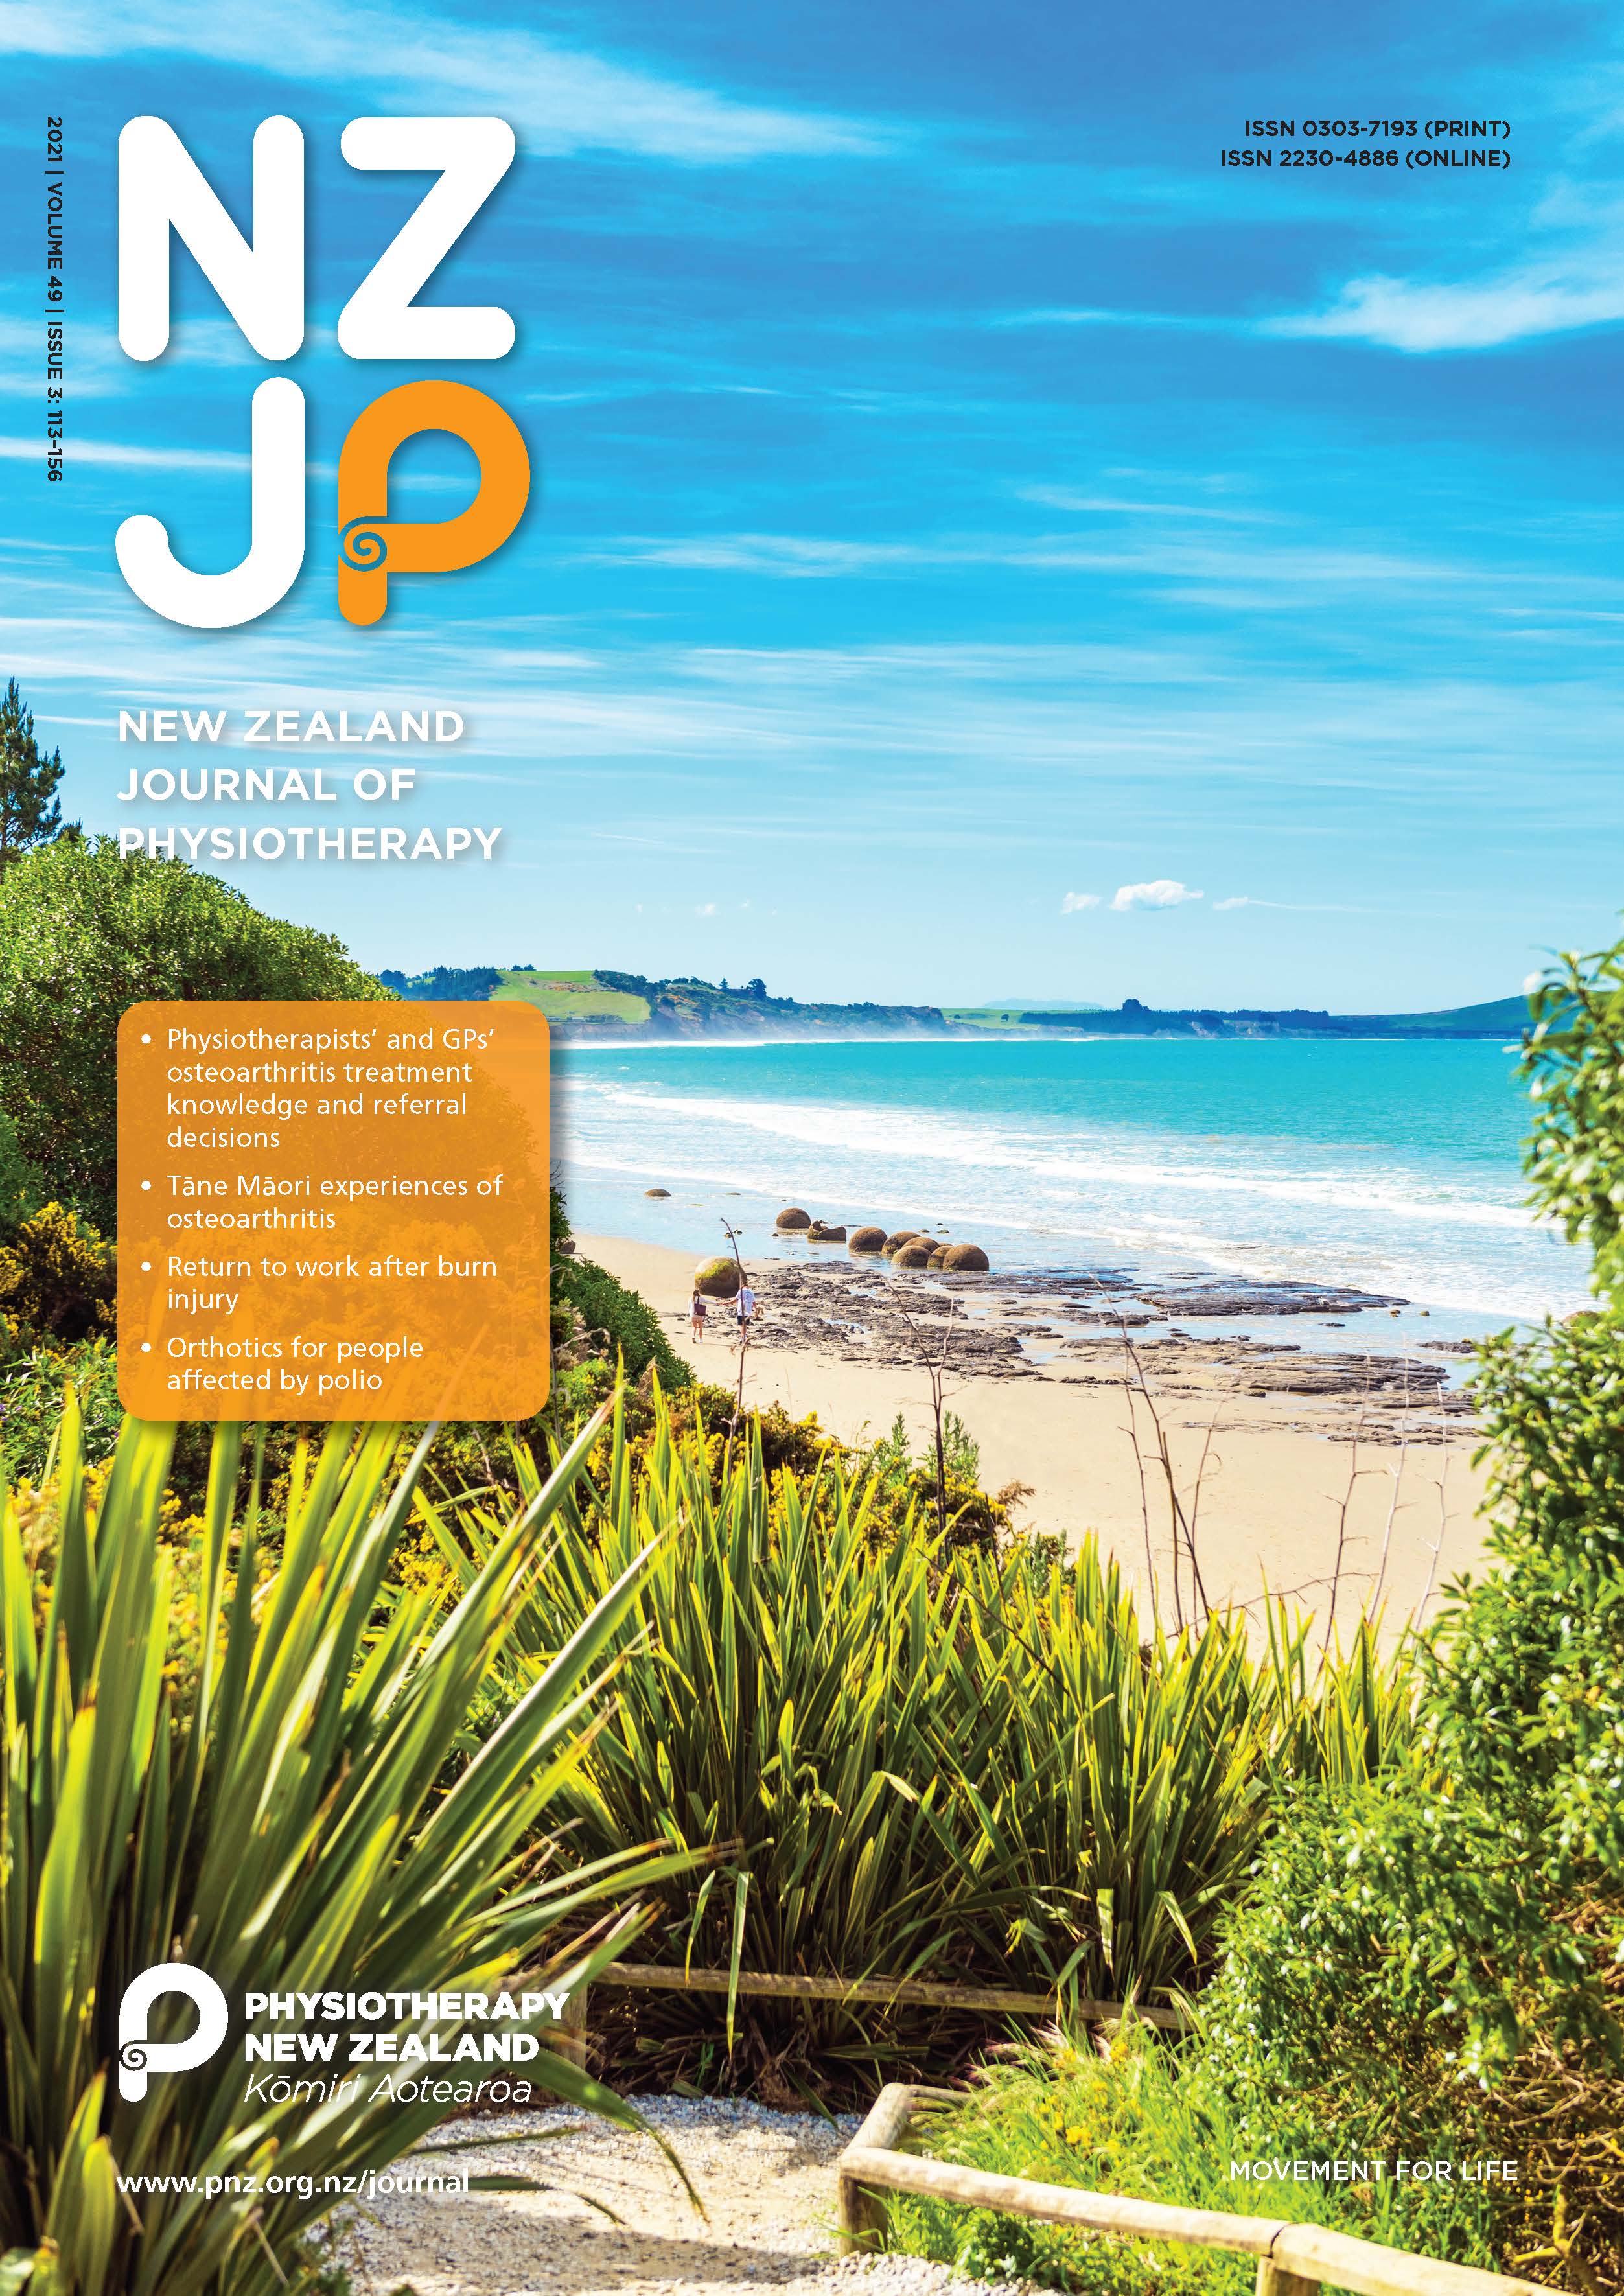 					View Vol. 49 No. 3 (2021): New Zealand Journal of Physiotherapy
				